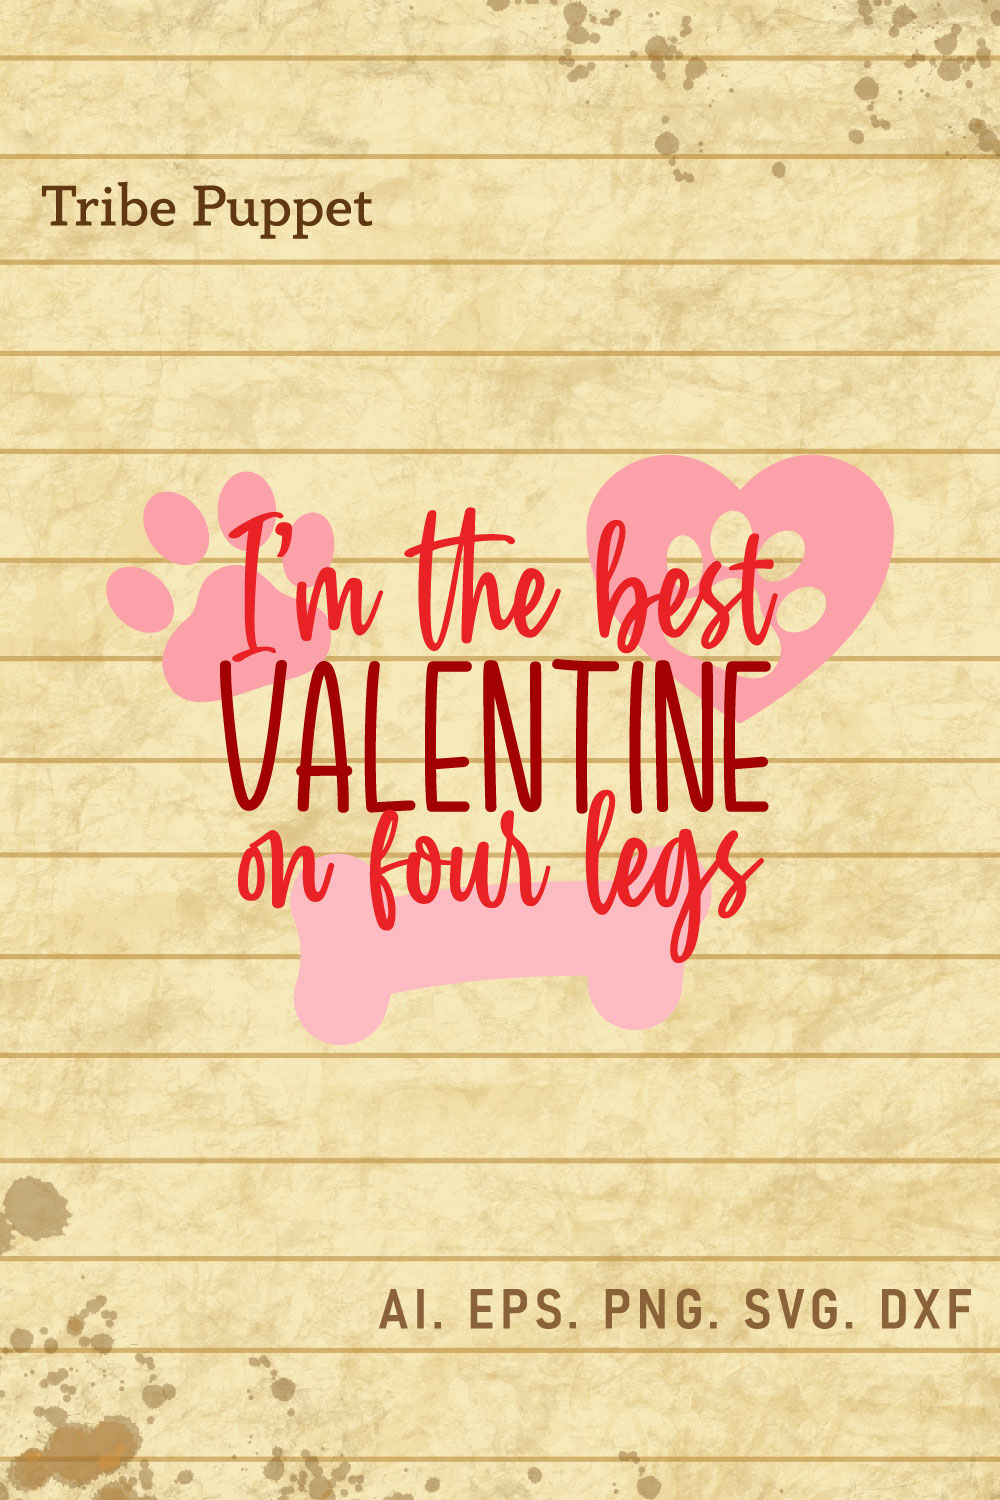 Dog valentines day quotes pinterest preview image.